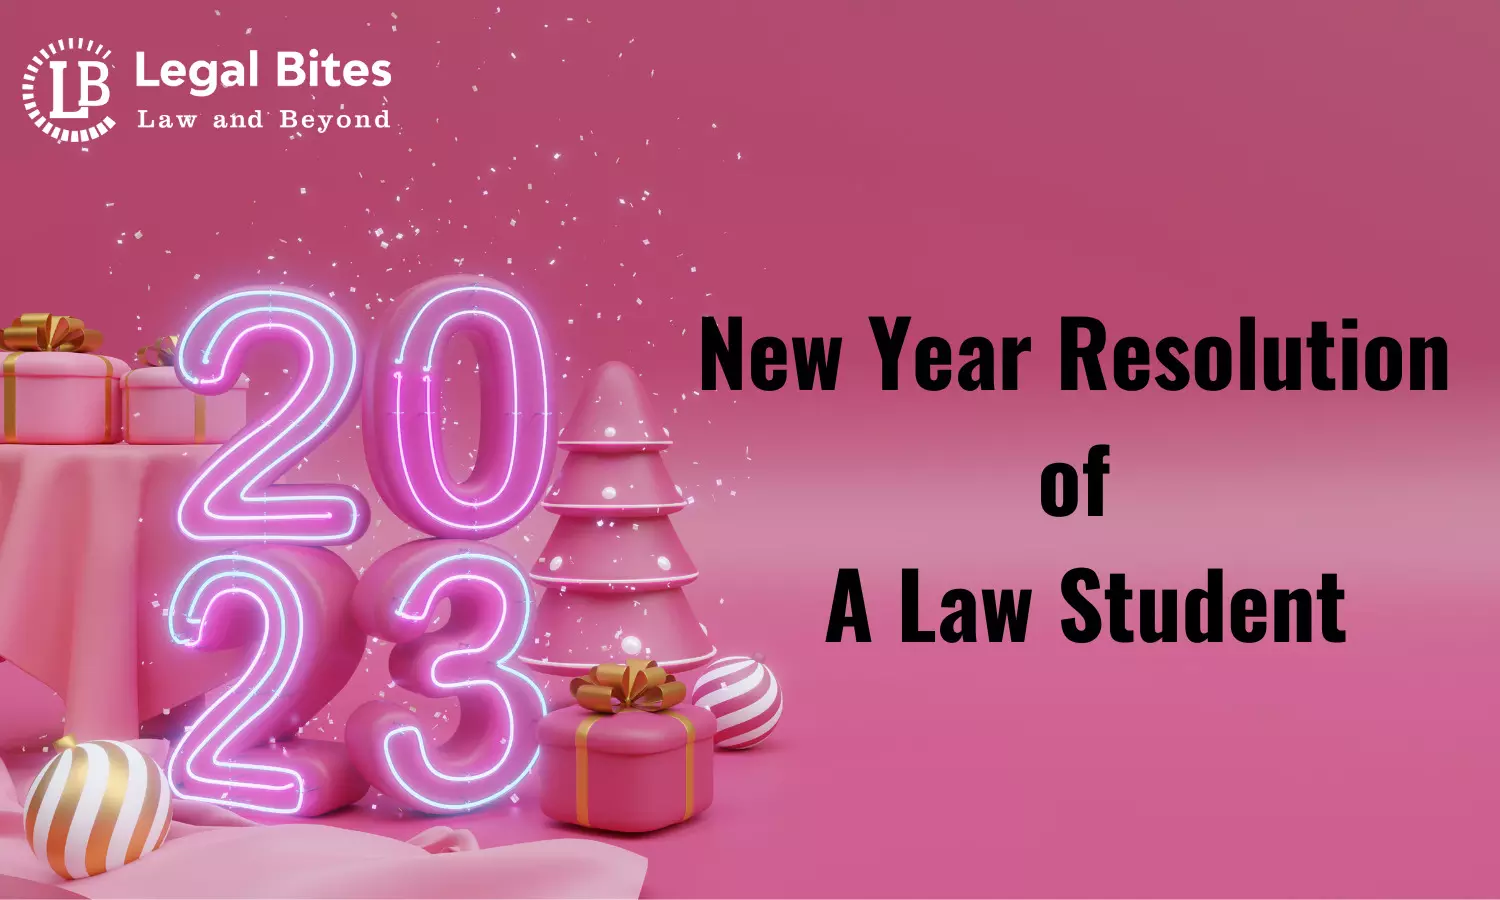 New Year Resolution of a Law Student